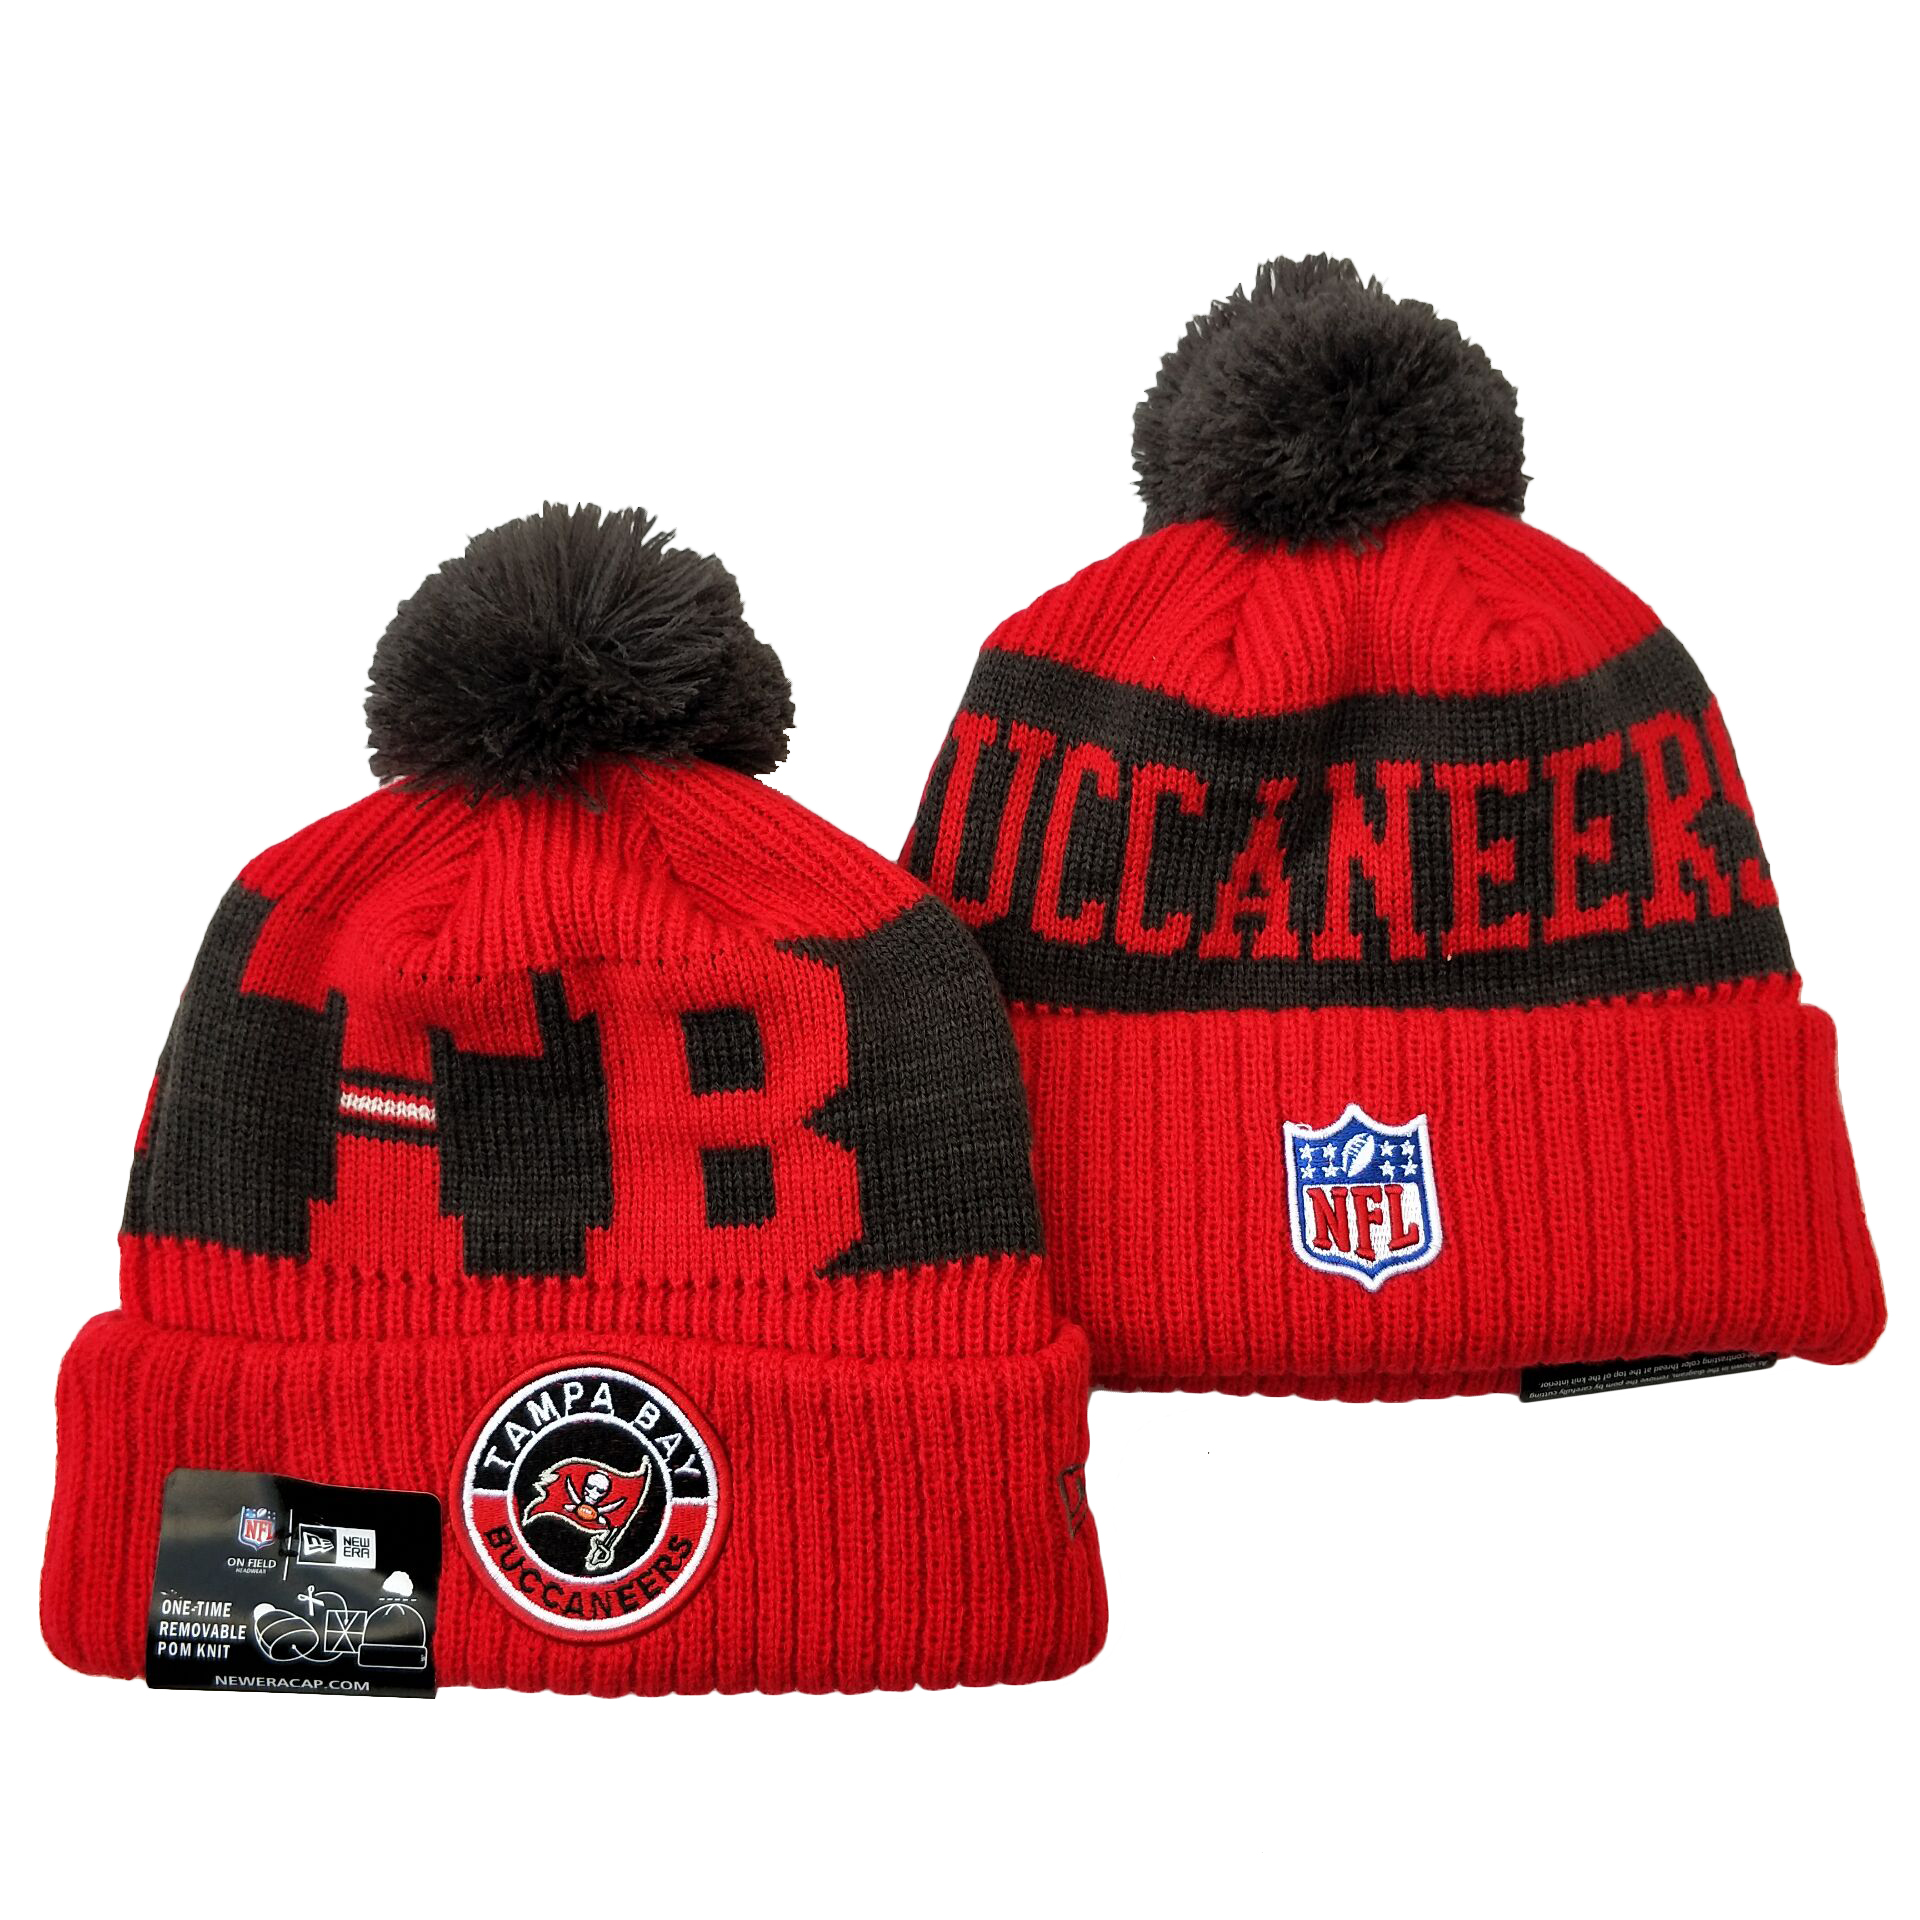 Tampa Bay Buccaneers 2021 Knit Hats 002